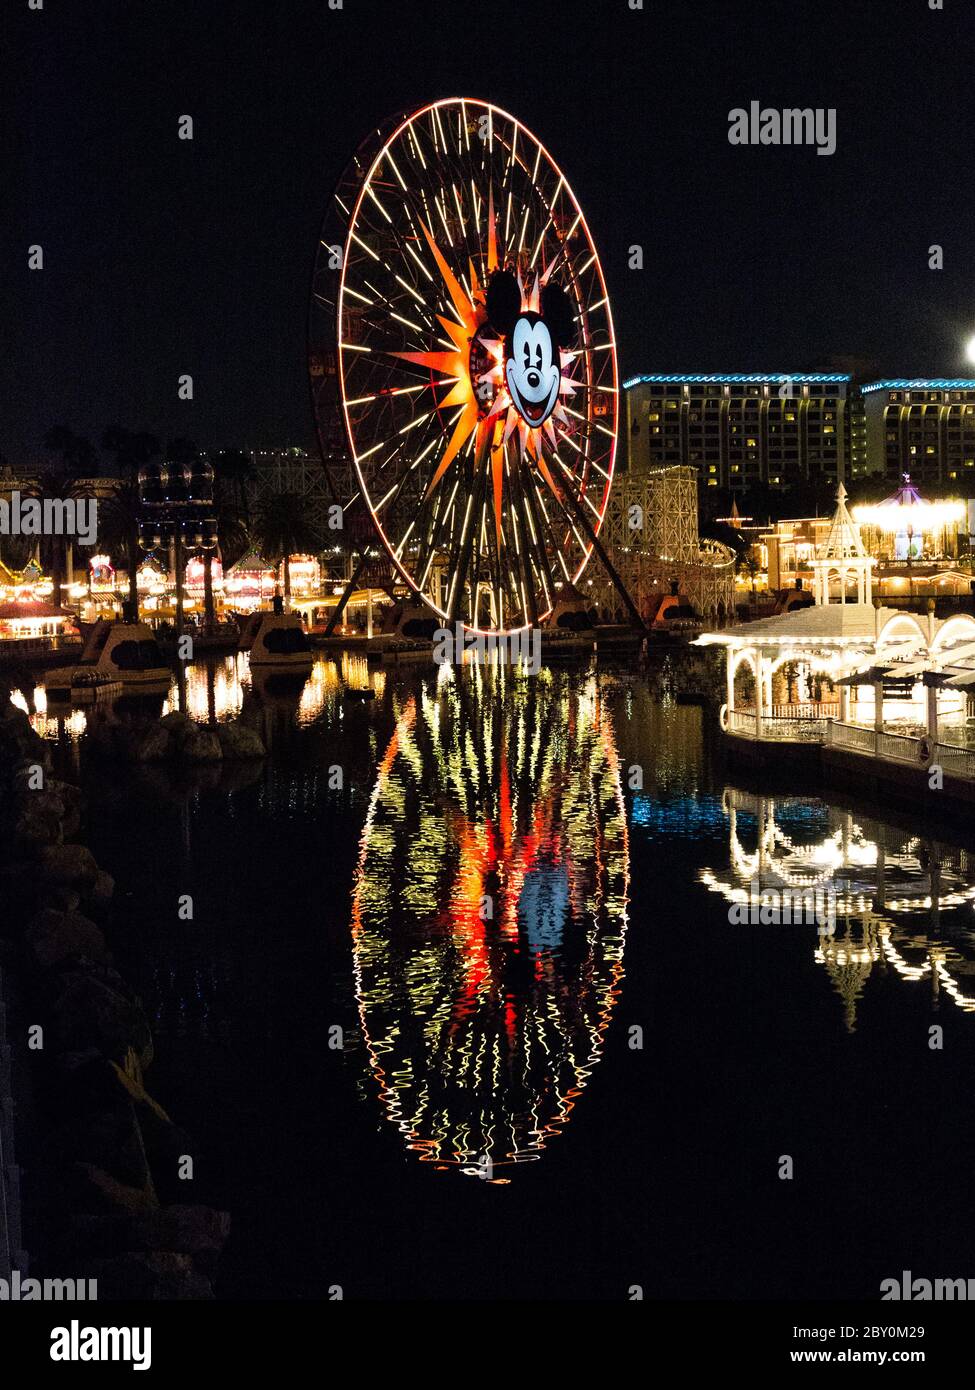 ANAHEIM, CALIFORNIA - December 1st, 2016 - Mickey's Fun Wheel which was changed to Pixar Pal-A-Round on June 23rd, 2018 Stock Photo